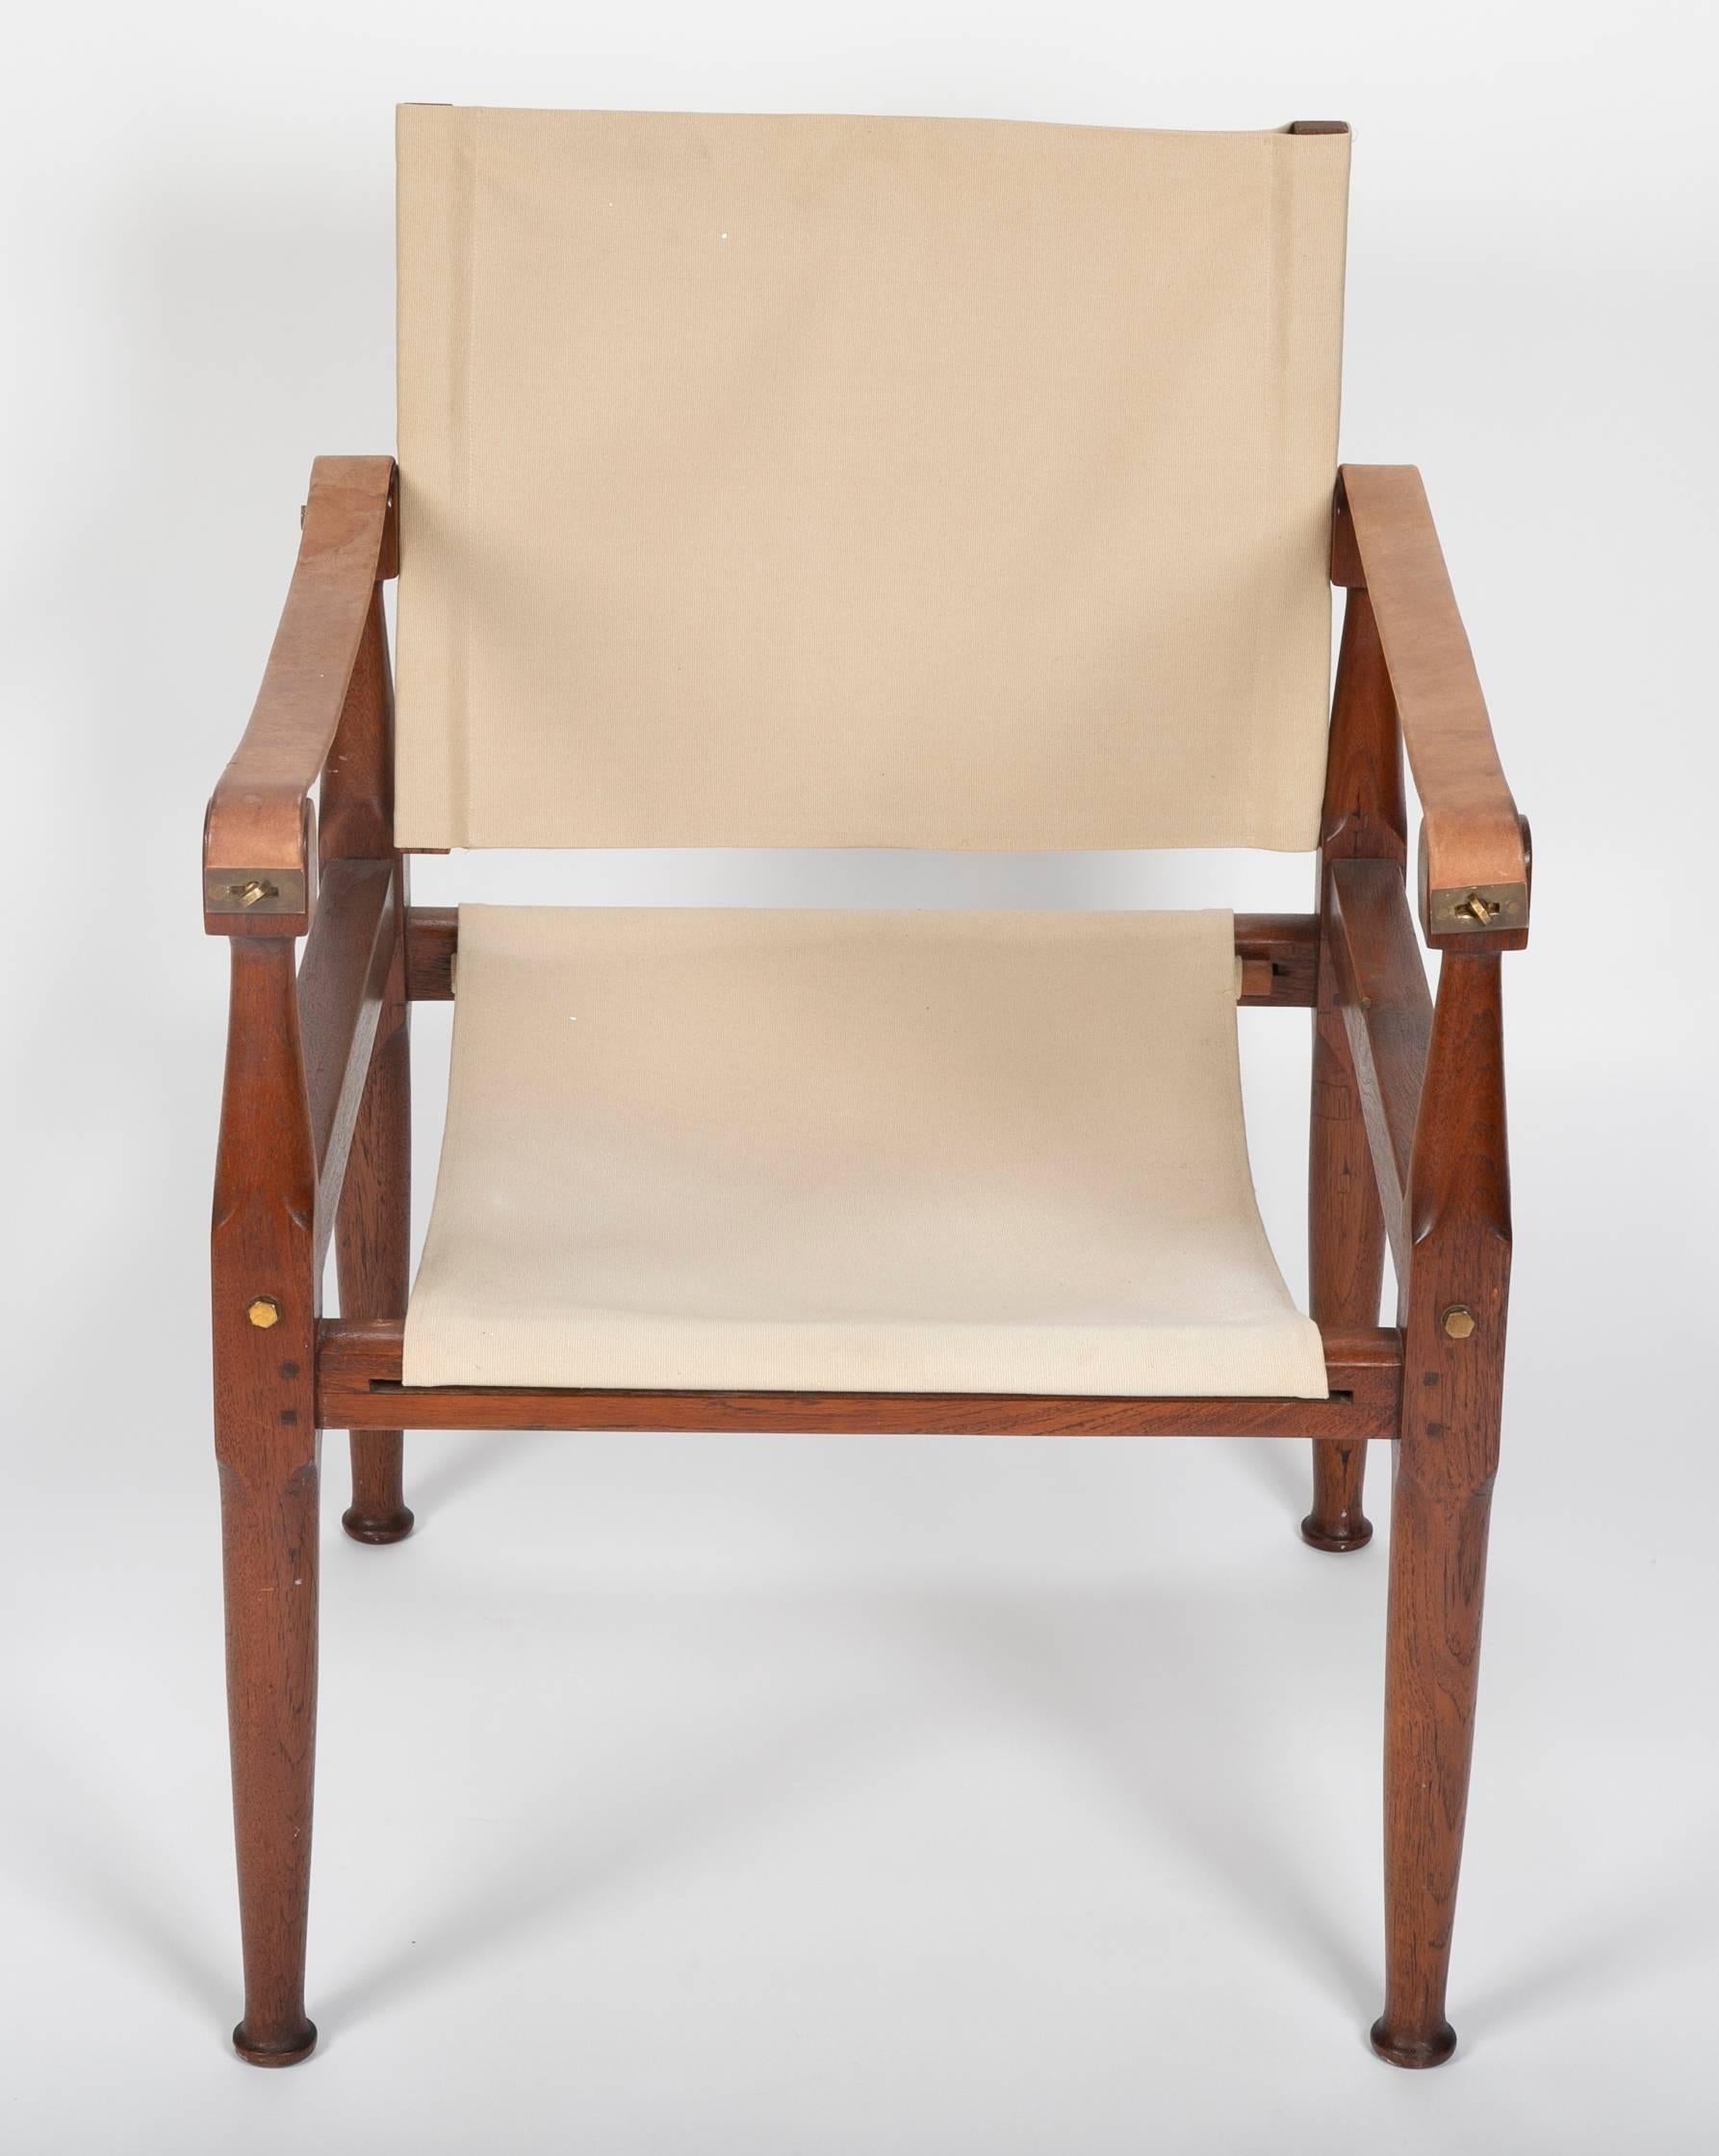 Pair of Campaign Chairs in the Manner of Karre Klint 1